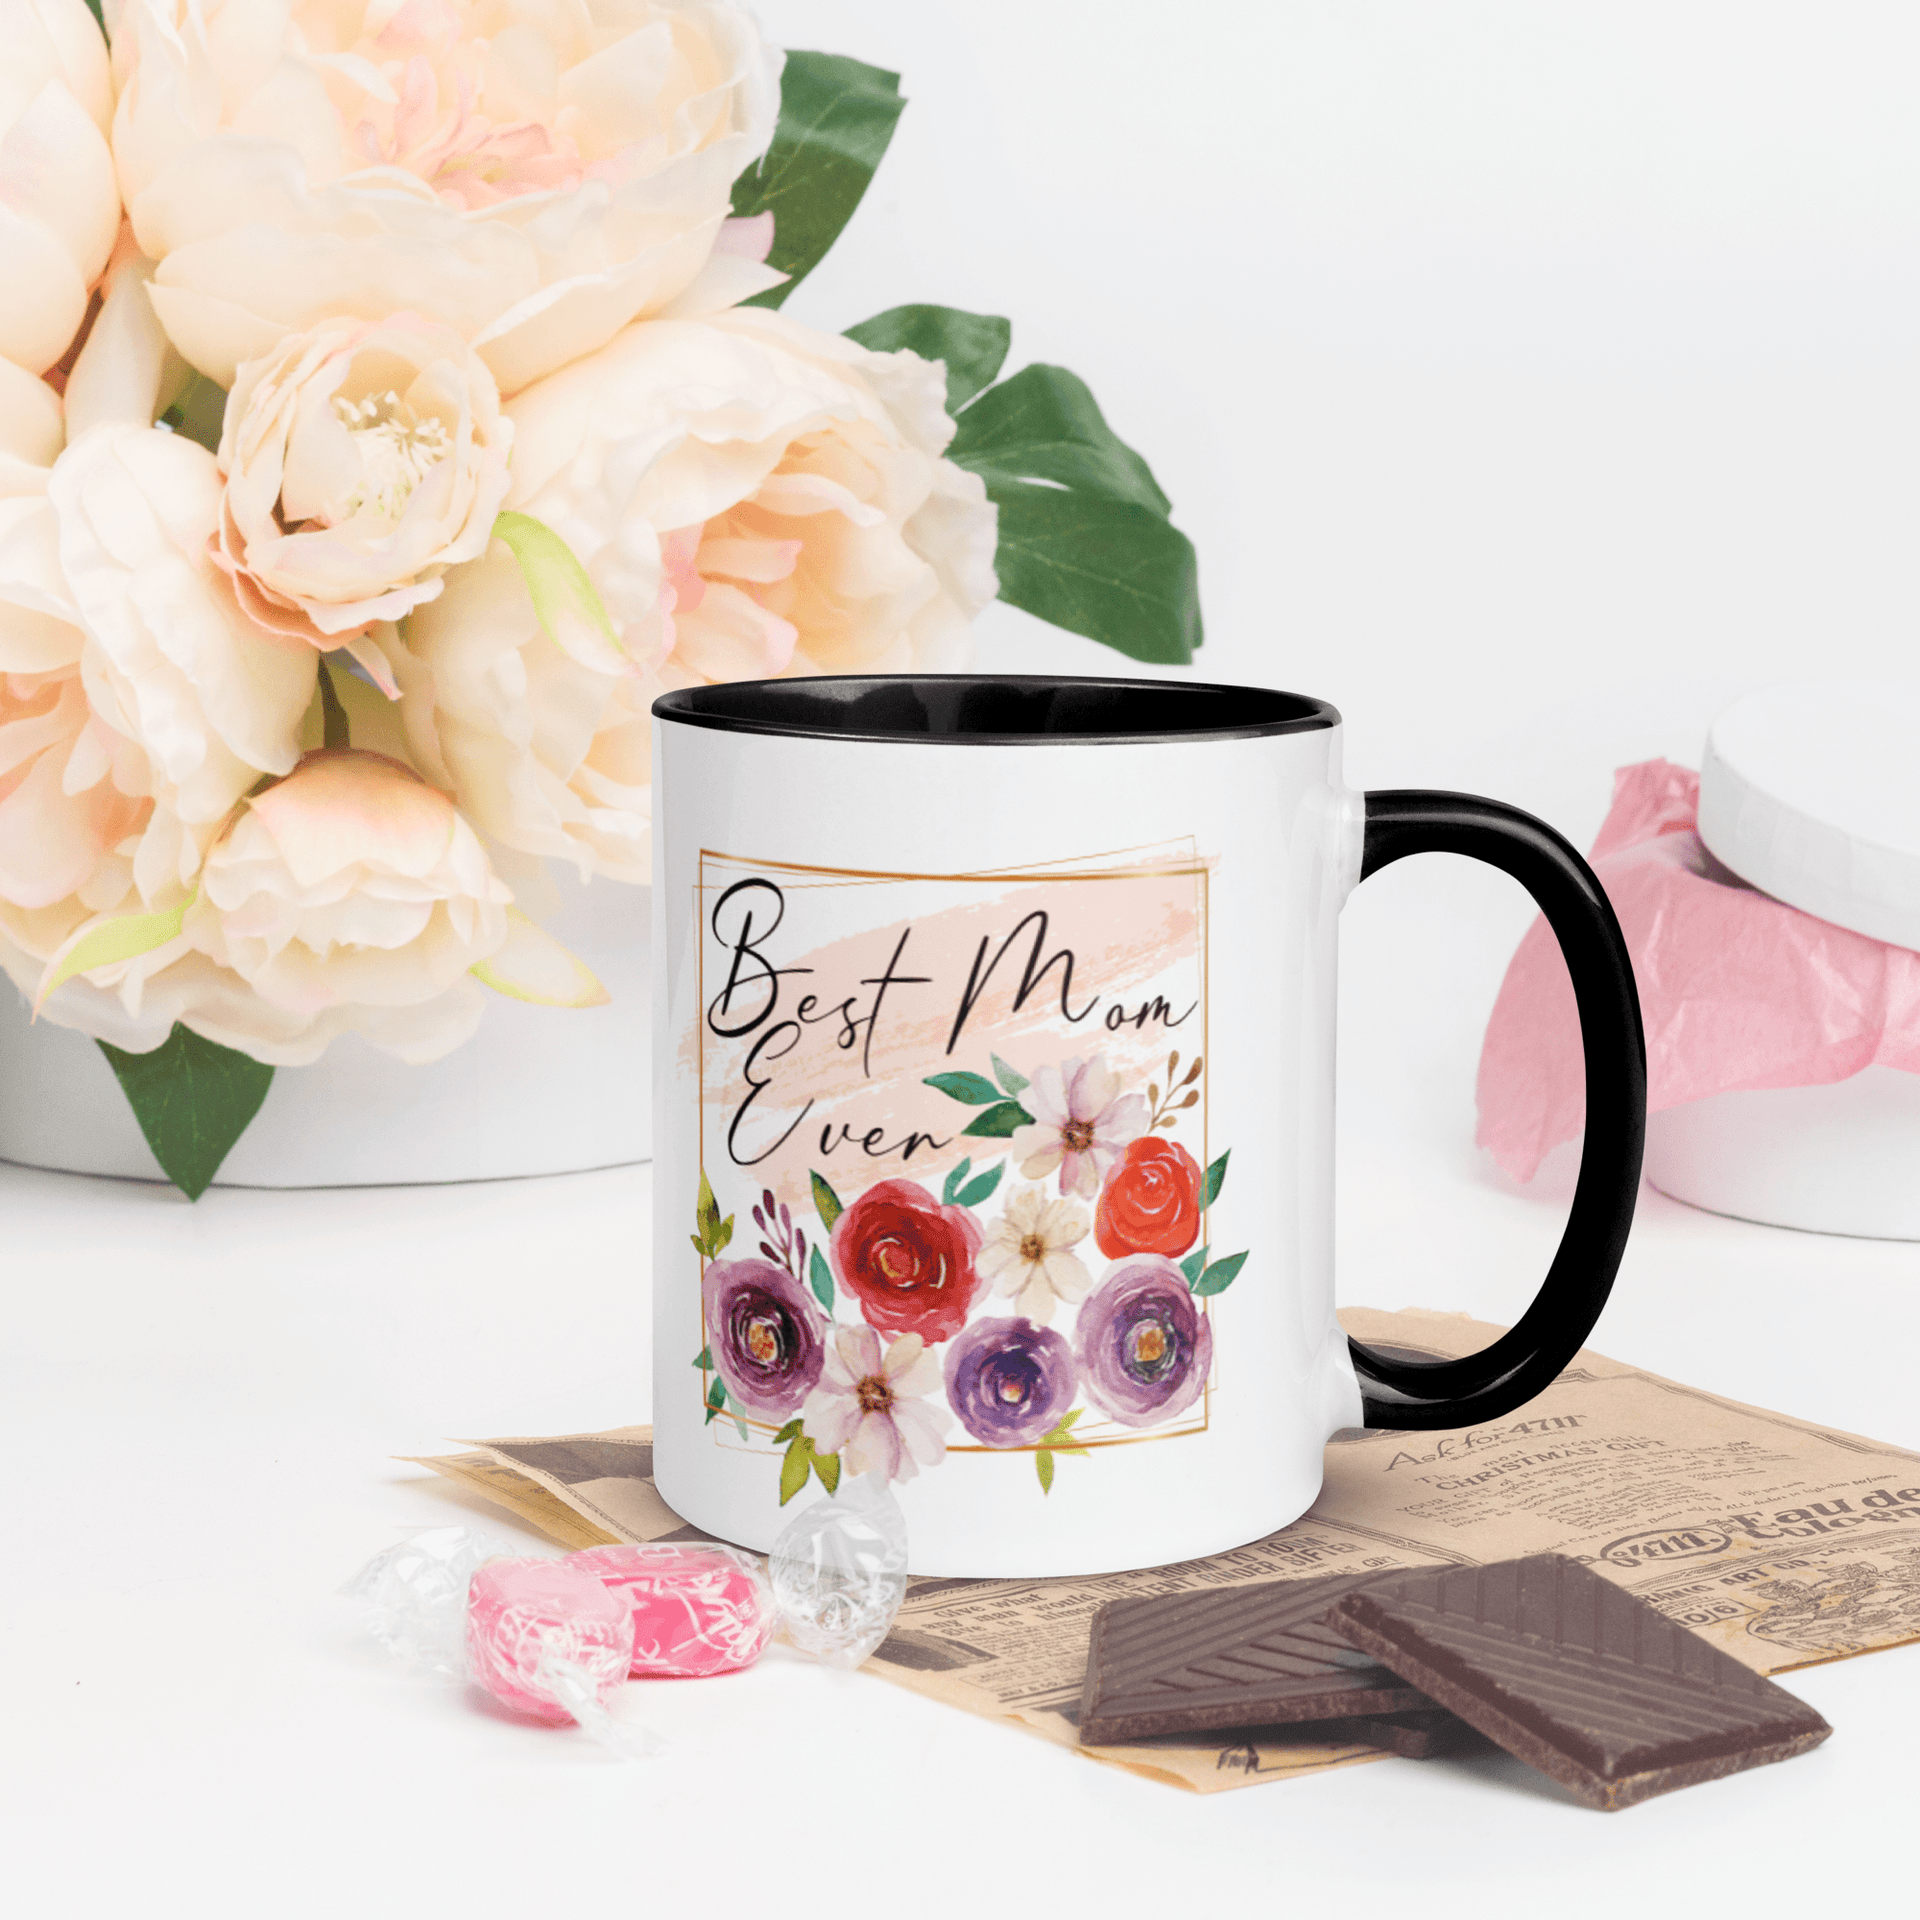 Best Mom Ever White and Pink Ceramic Coffee Mug - Numbers 6:24